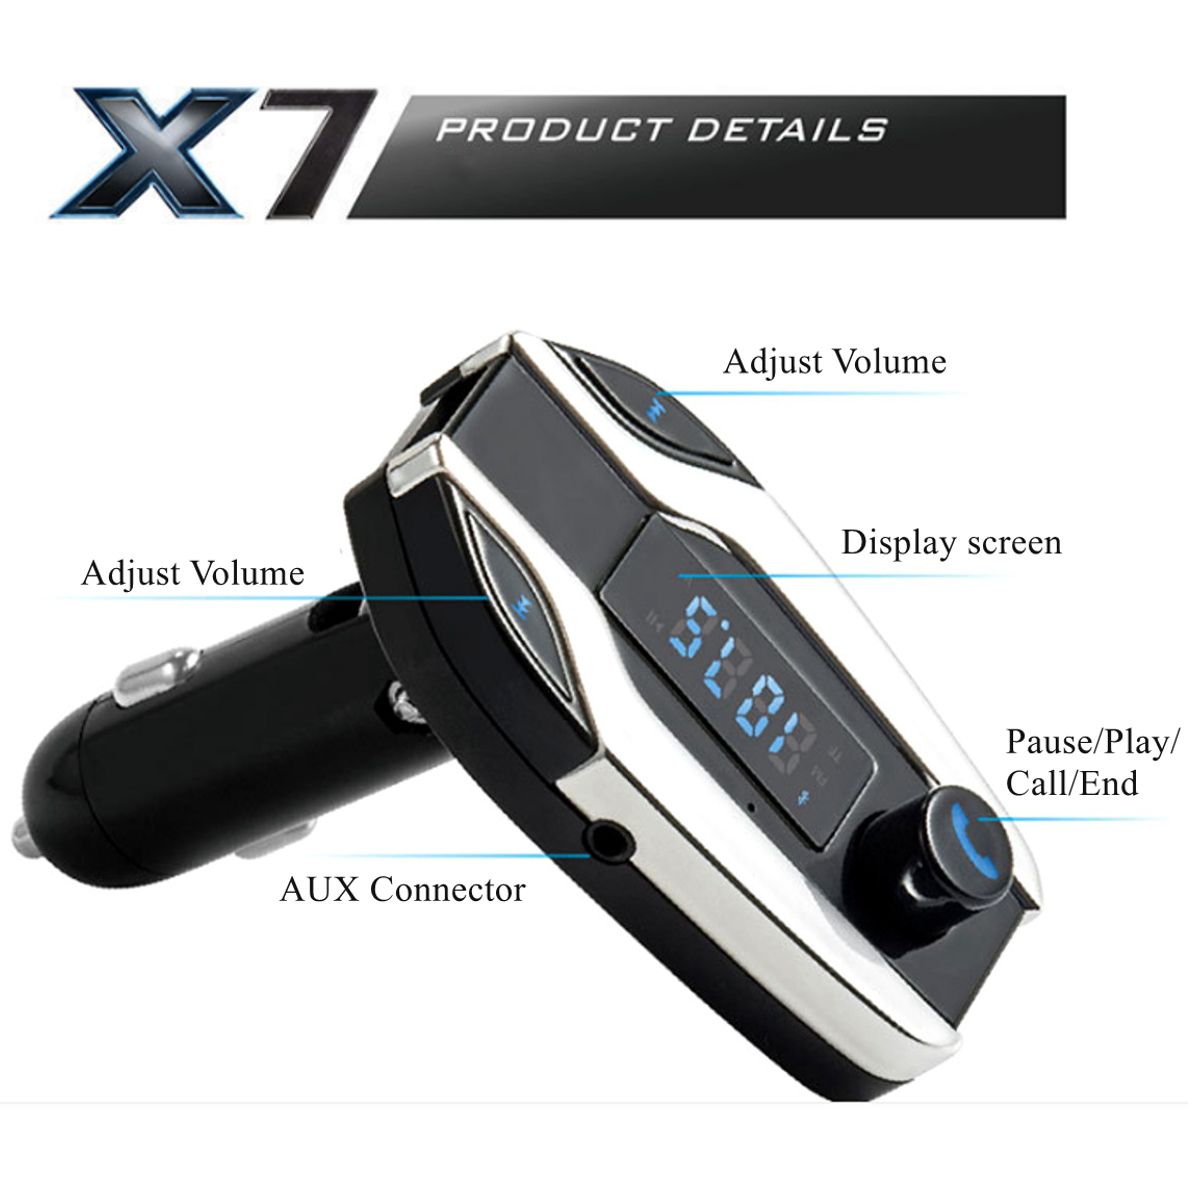 X7-Wireless-bluetooth-Car-Kit-MP3-Player-FM-Transmitter-SD-USB-Charger-for-Phone-1166206